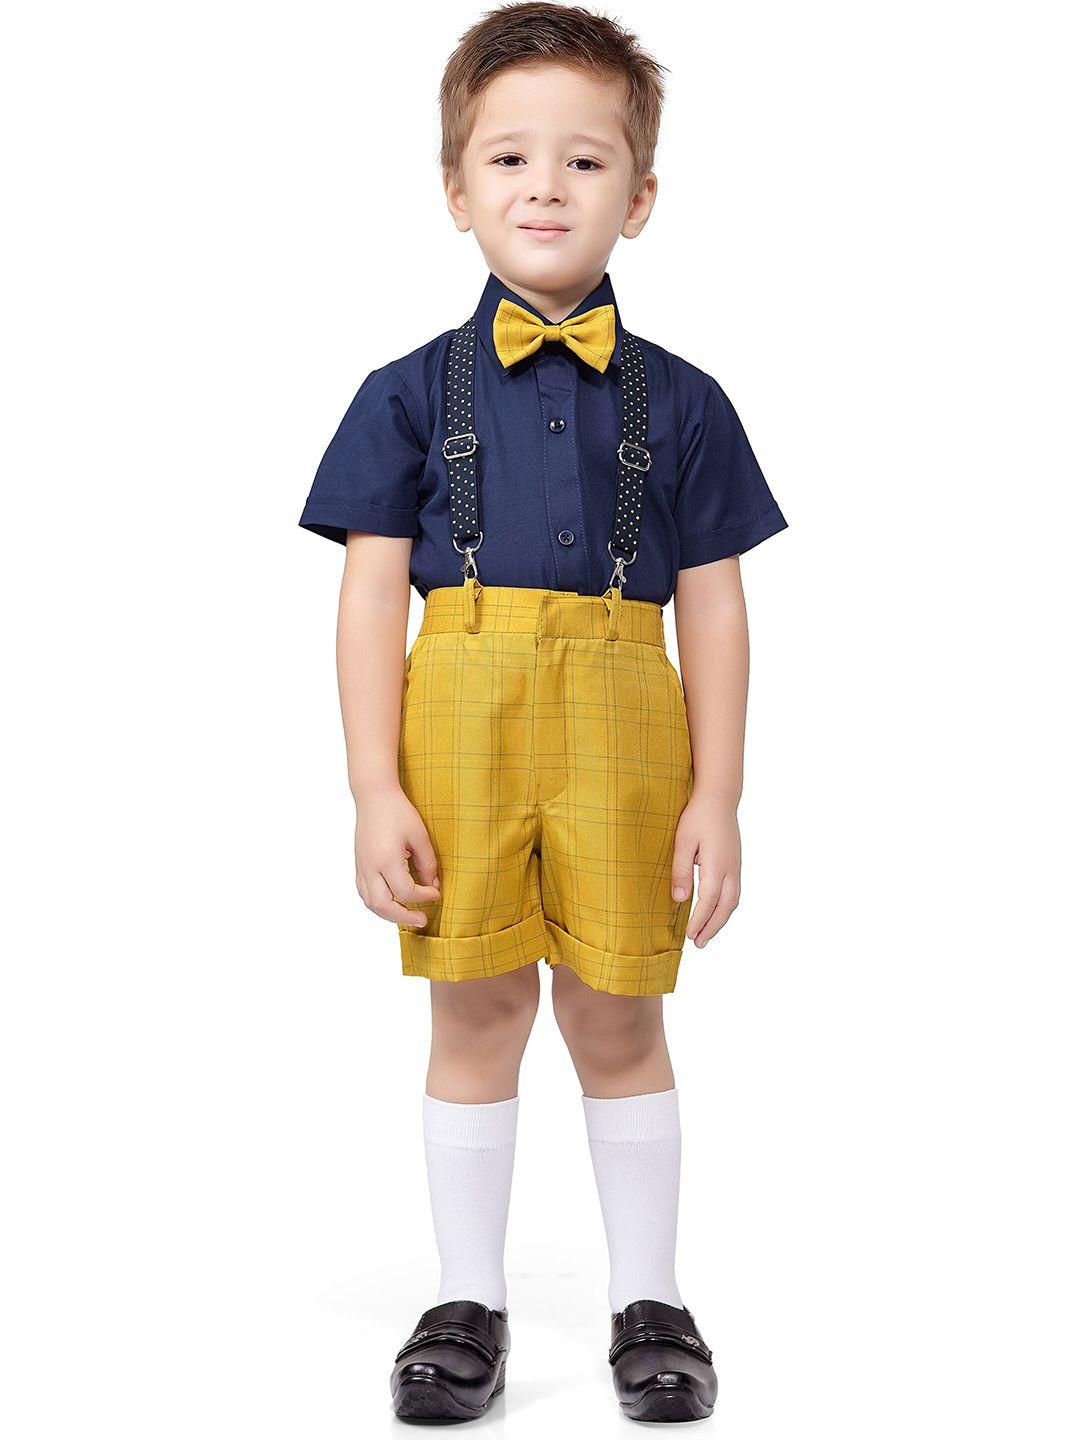 jeetethnics-boys-yellow-&-blue-shirt-with-shorts-with-bow-tie